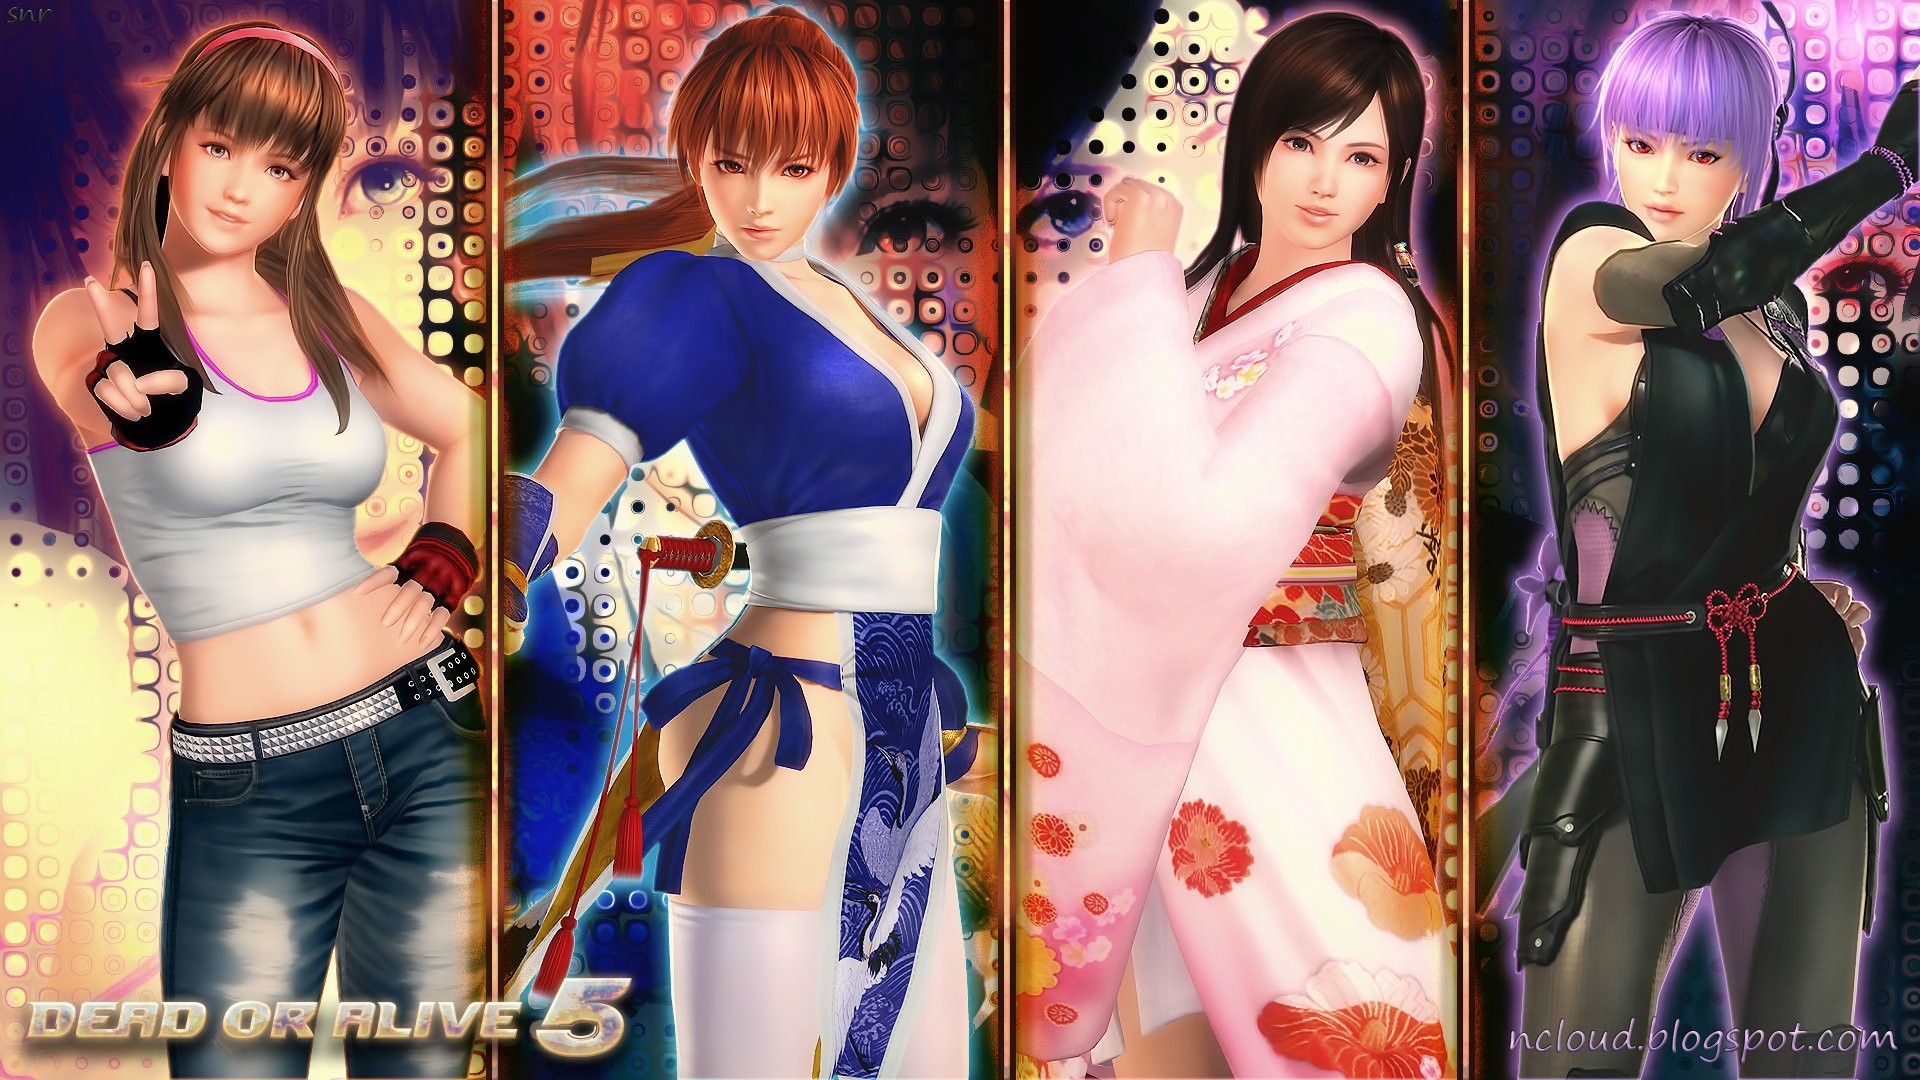 1920x1080 Dead Or Alive 5 603107